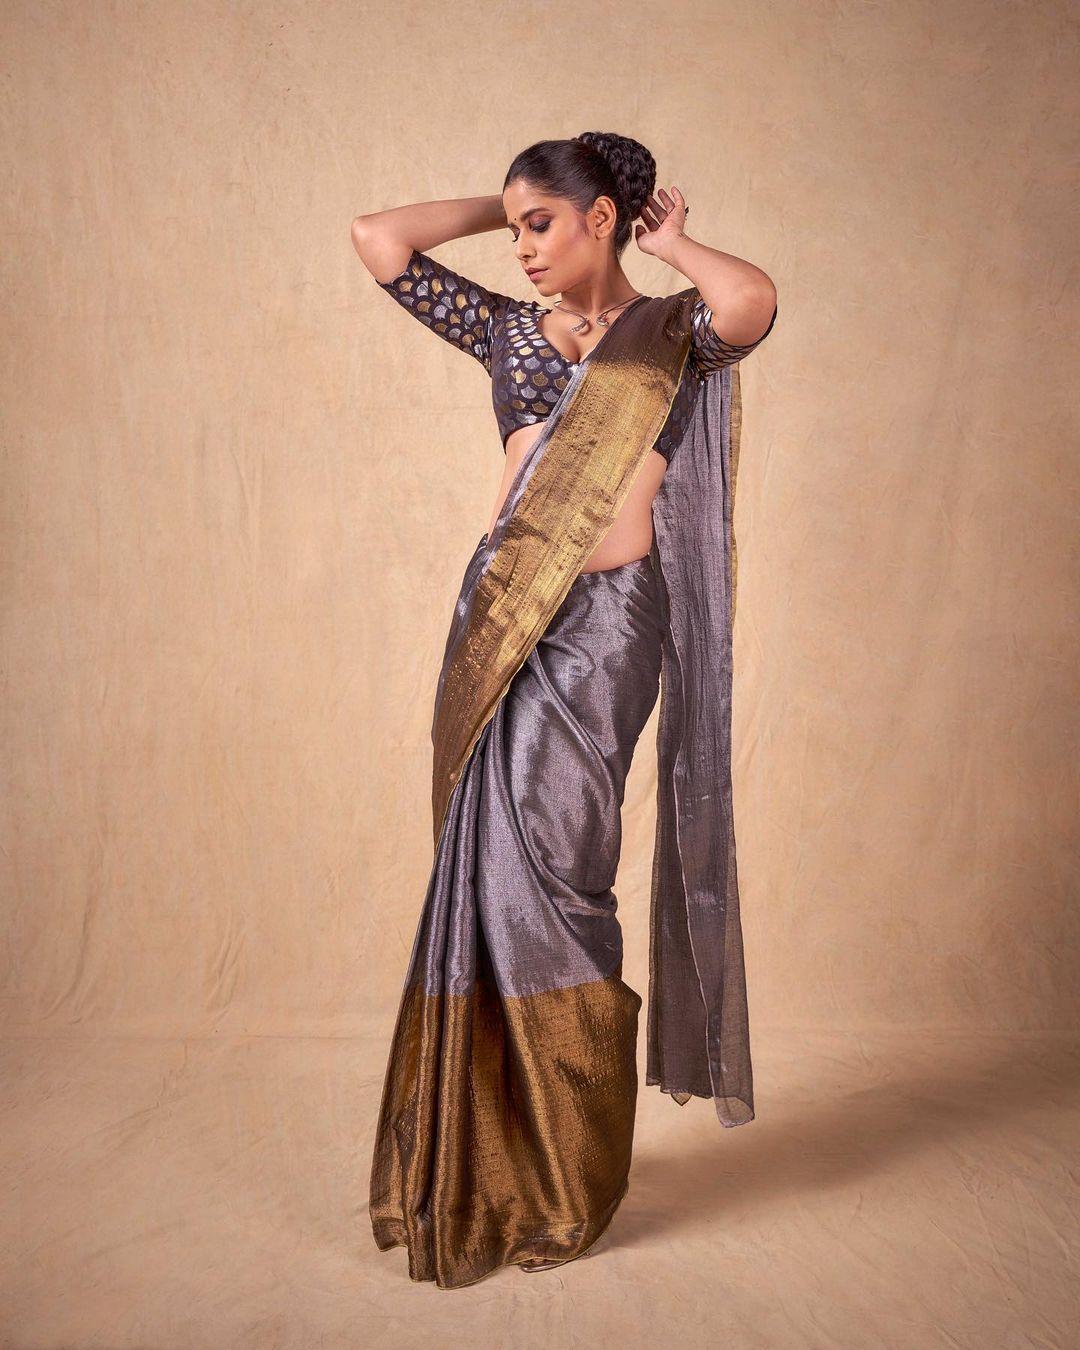 Sai Tamhankar consistently delights her fans with her impeccable fashion sense, particularly in traditional wear. In this captivating look, Sai donned a stunning grey saree with a broad golden border, radiating timeless charm